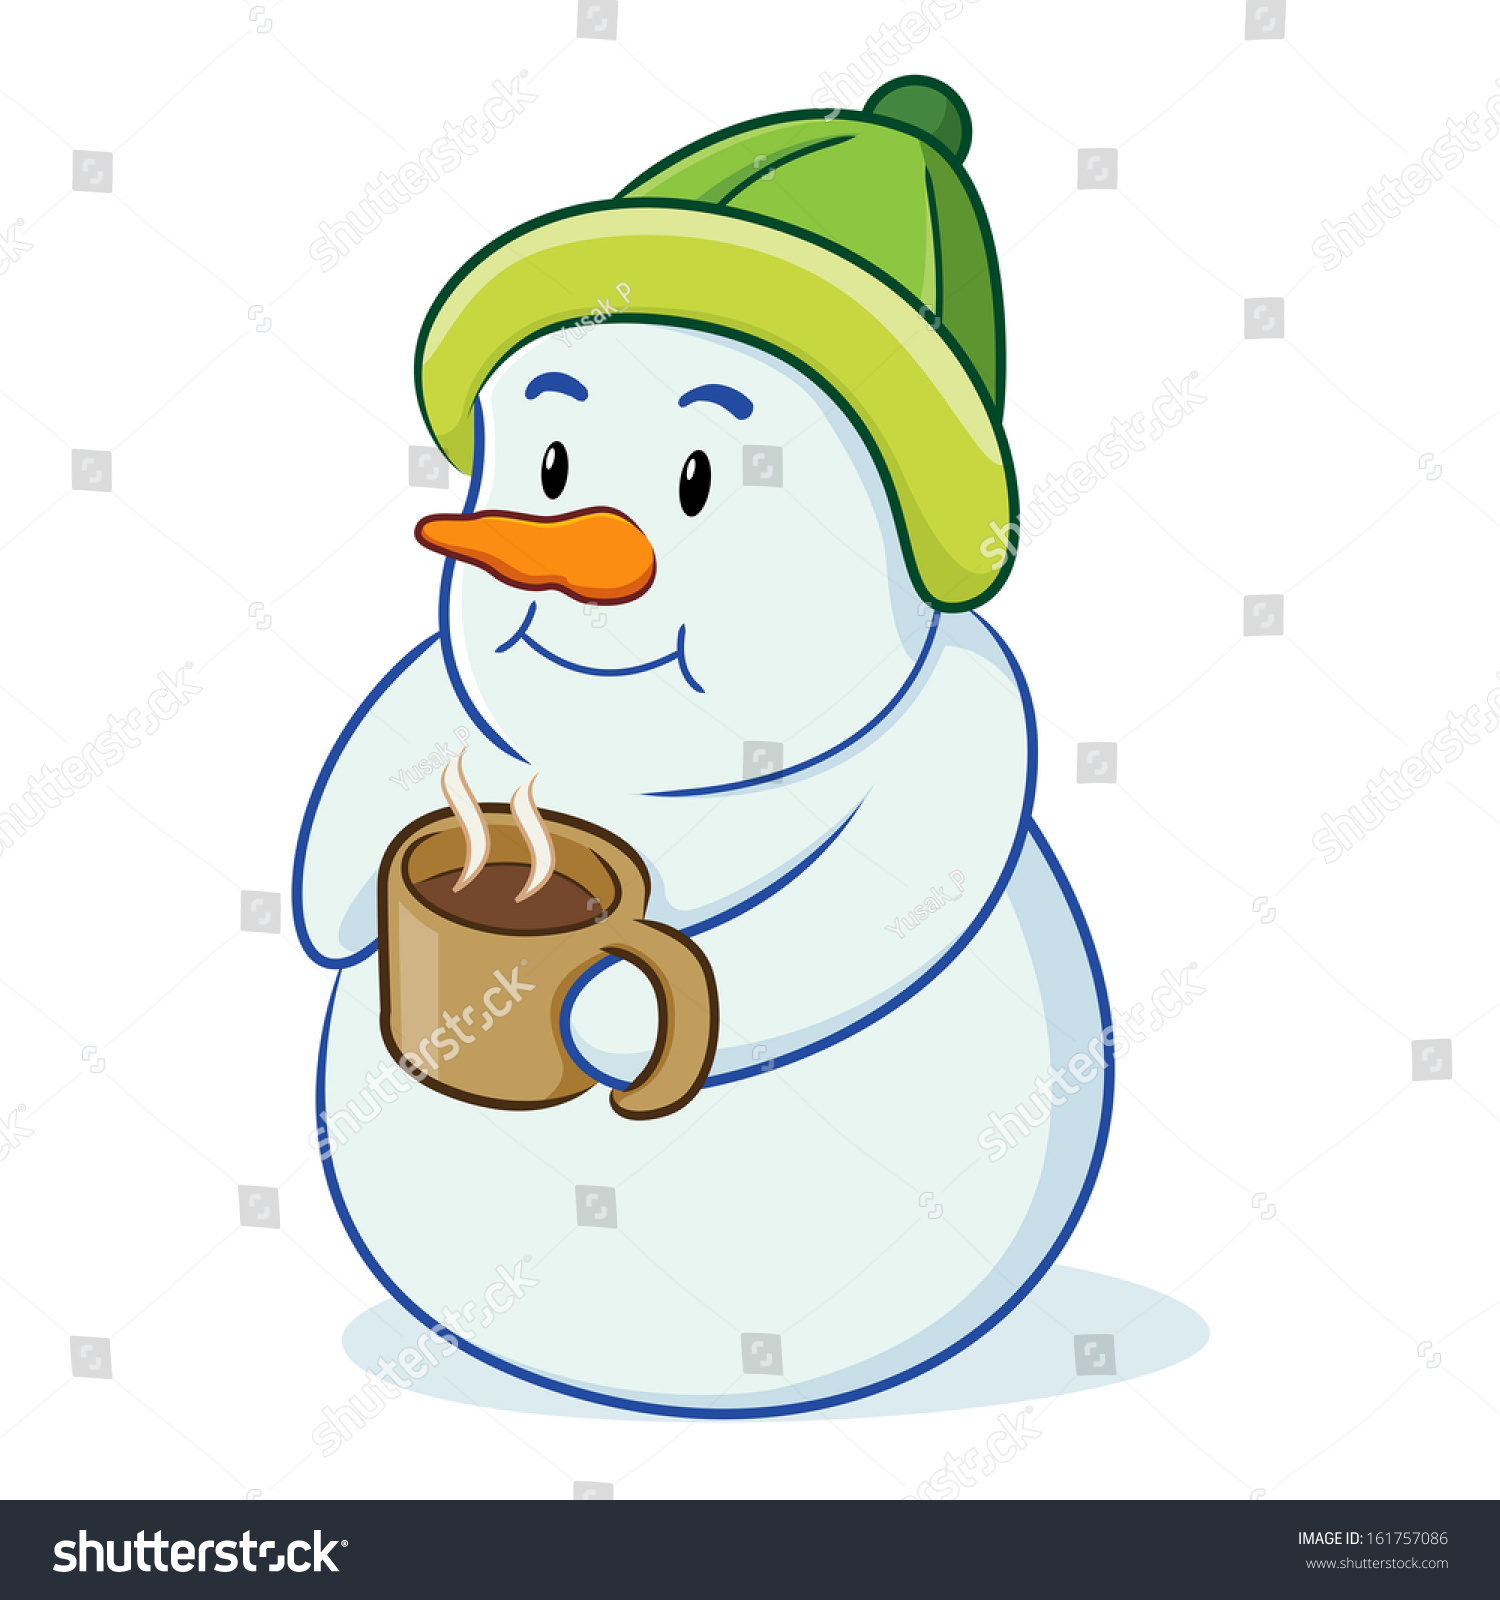 stock-vector-snowman-holding-a-cup-of-hot-coffee-vector-illustration-161757086.jpg